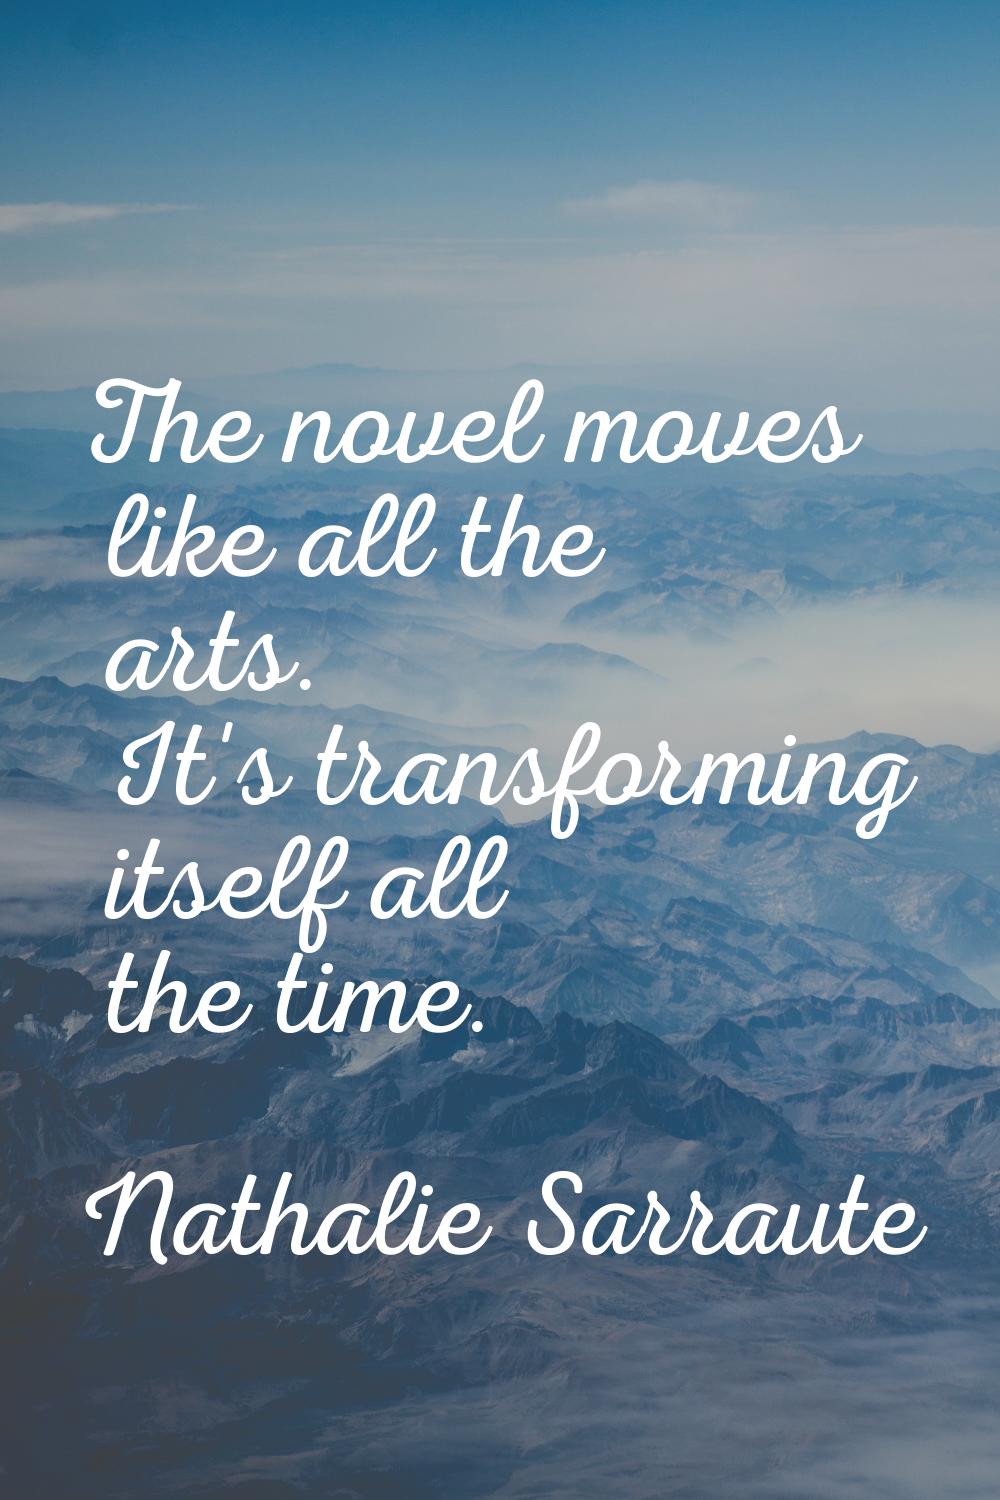 The novel moves like all the arts. It's transforming itself all the time.